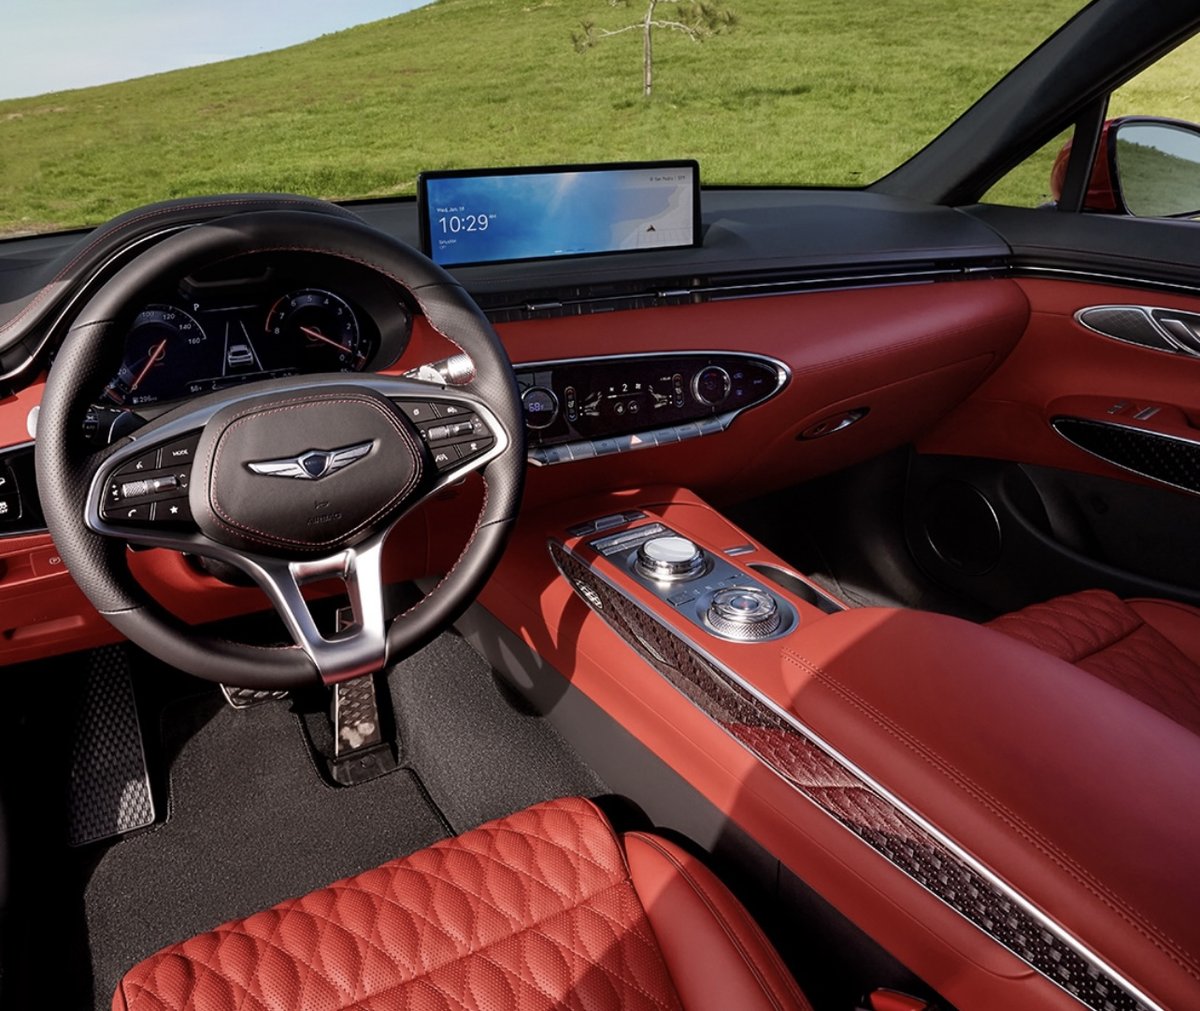 Get ready for the ride of your life with the 2023 Genesis GV70! With its luxurious interior, ergonomic design and technology, you'll be living in style! #GenesisGV70 #LuxeInterior